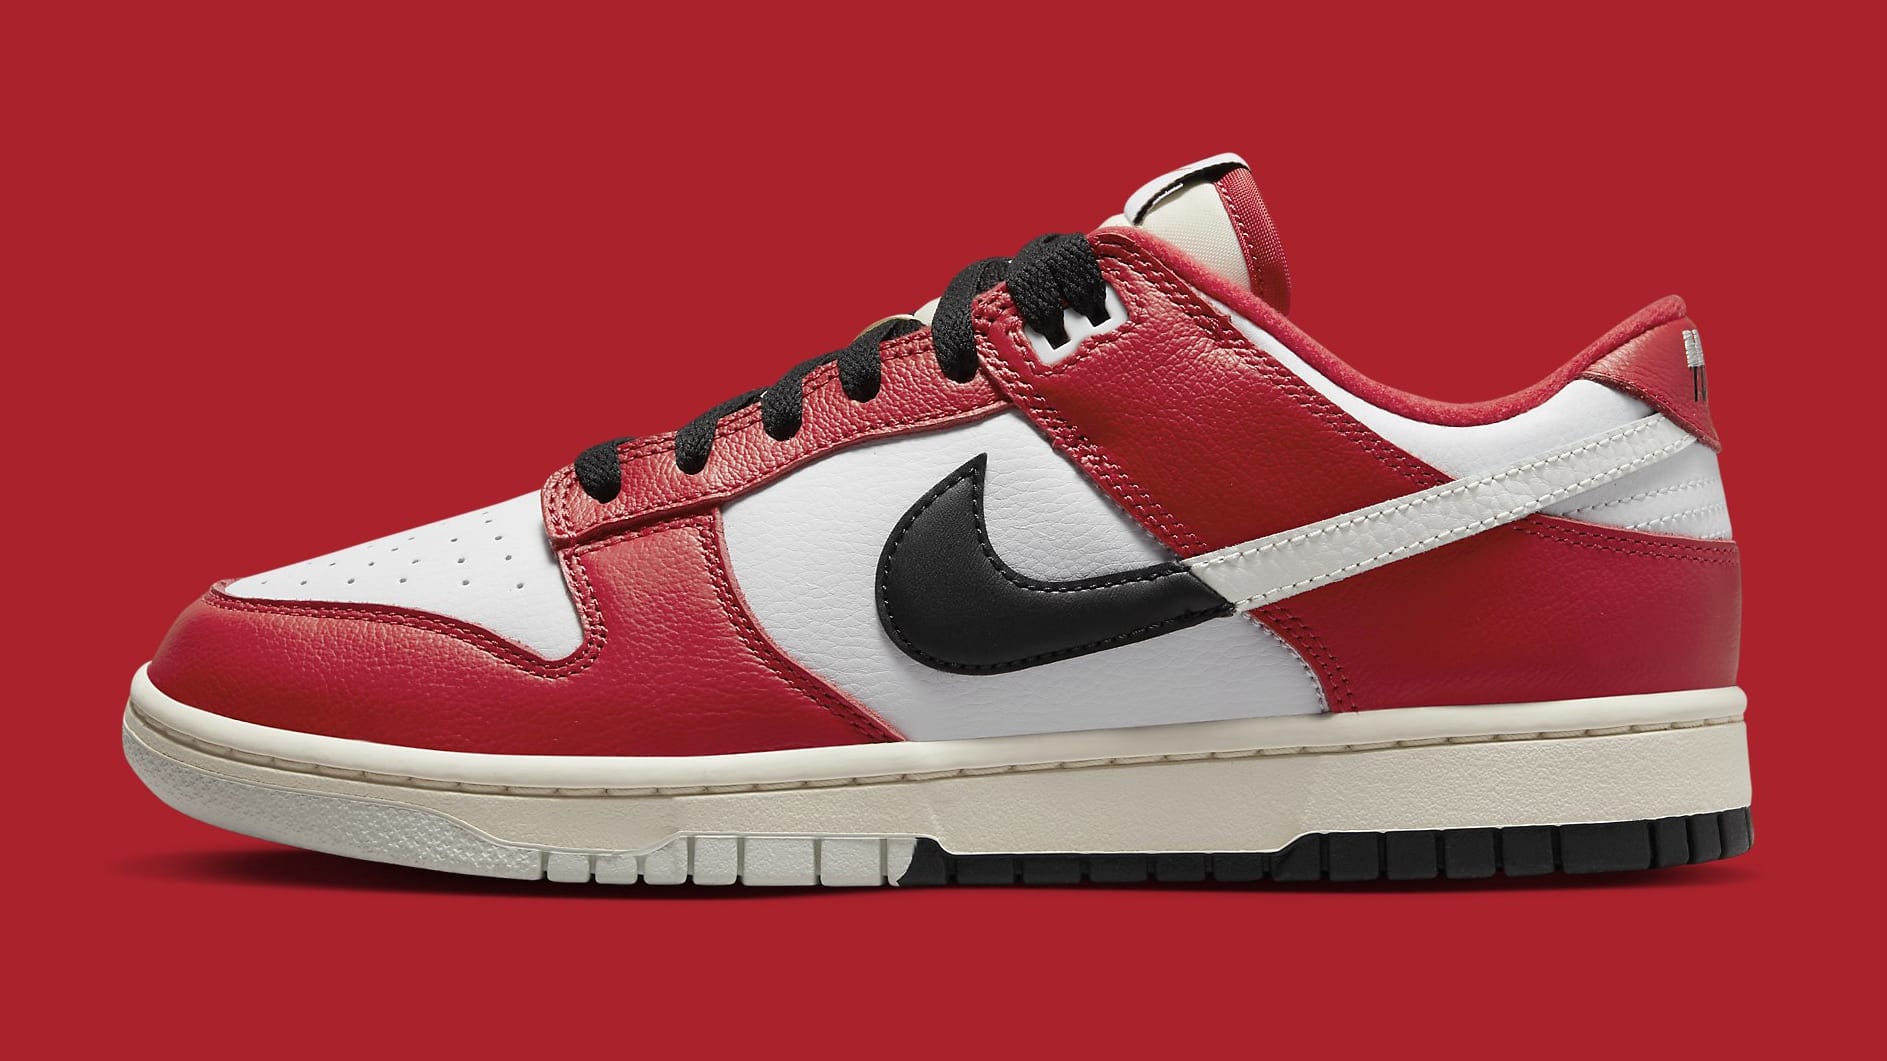 Best Look Yet at the 'Chicago Split' Nike Dunk Featuring new split details